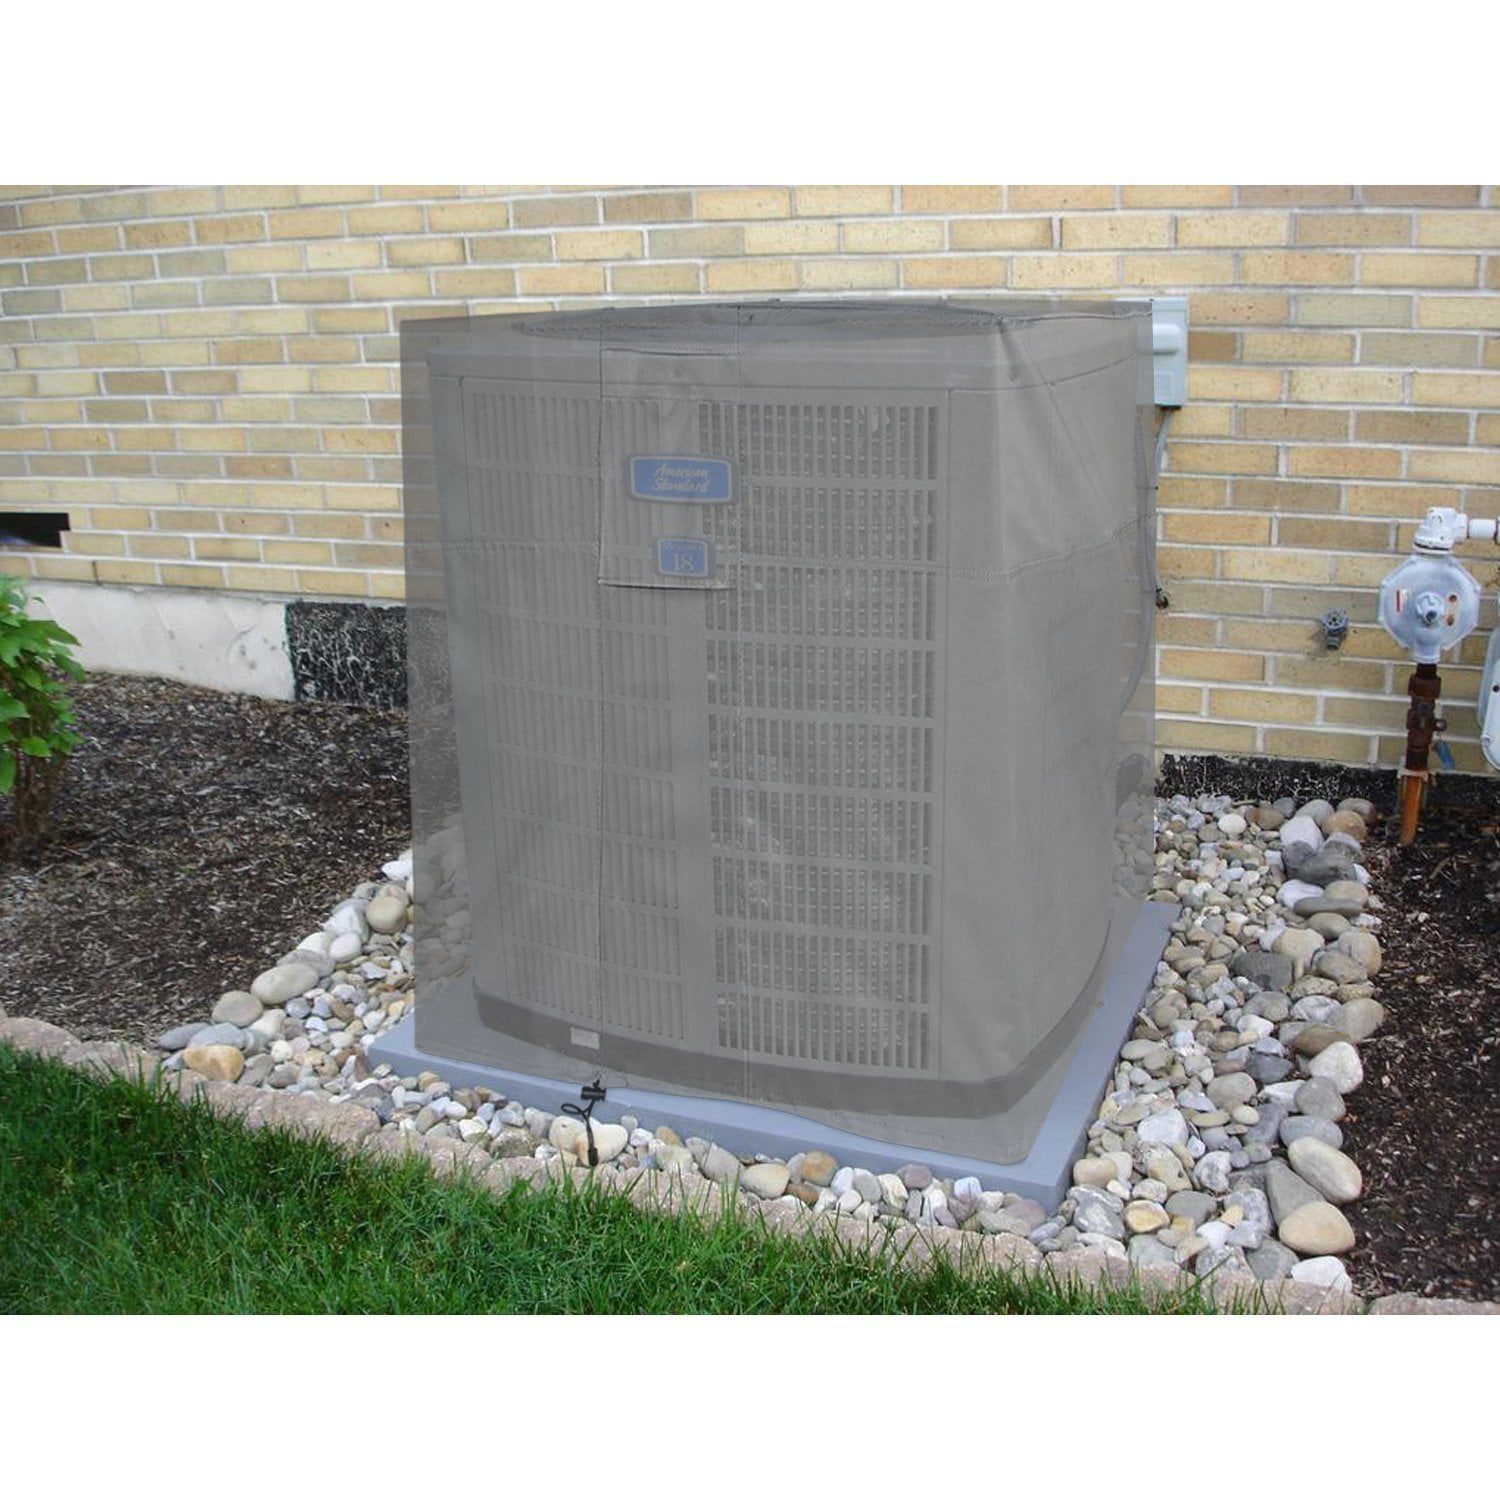 Waterproof Square Air Conditioner Cover 34"x34" Outdoor Gray Anti-UV Anti-Snow 